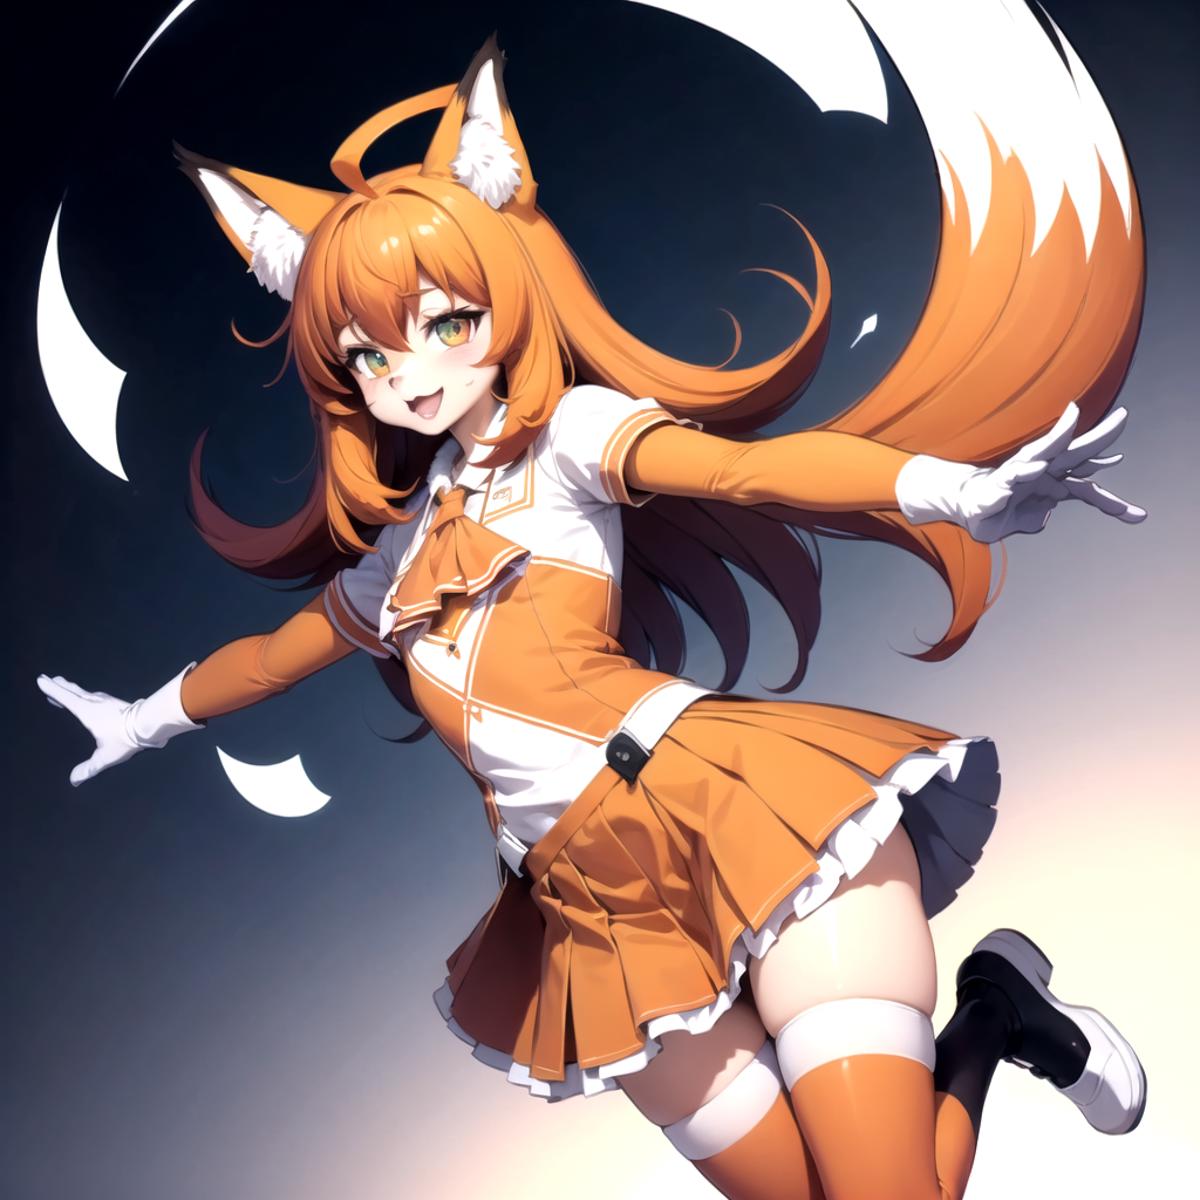 Furry Fox Girl Style #2 - Transform Characters into Fox Girls! image by Sunbutt